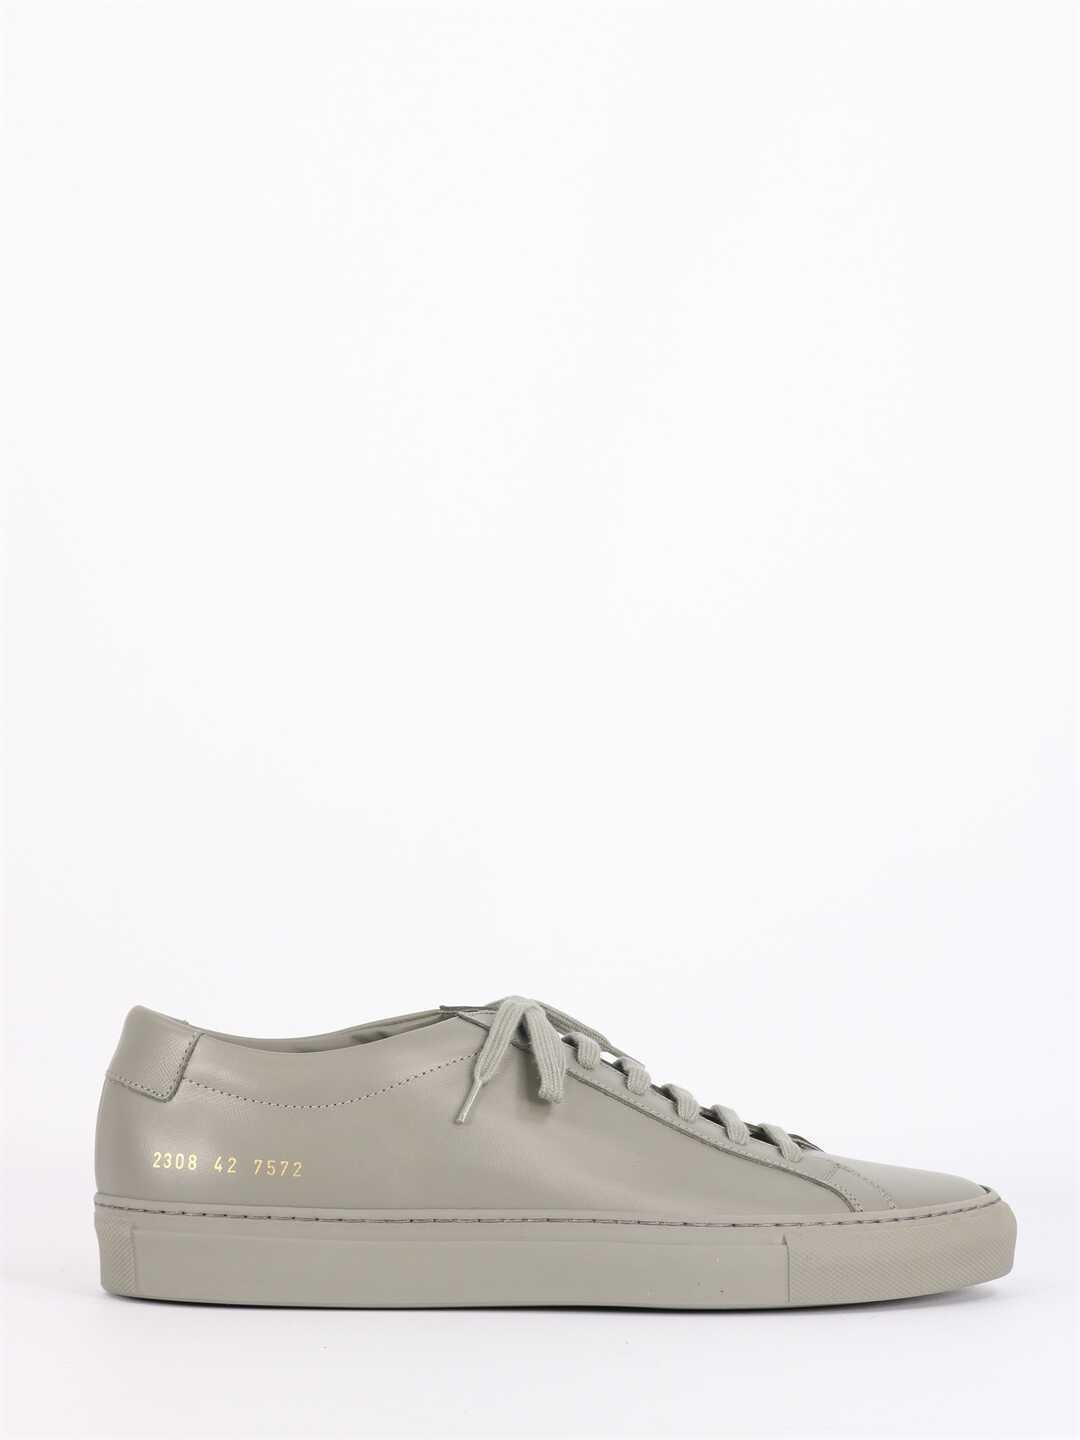 Common Projects Original Achilles Low Gray Sneakers 2308 Grey